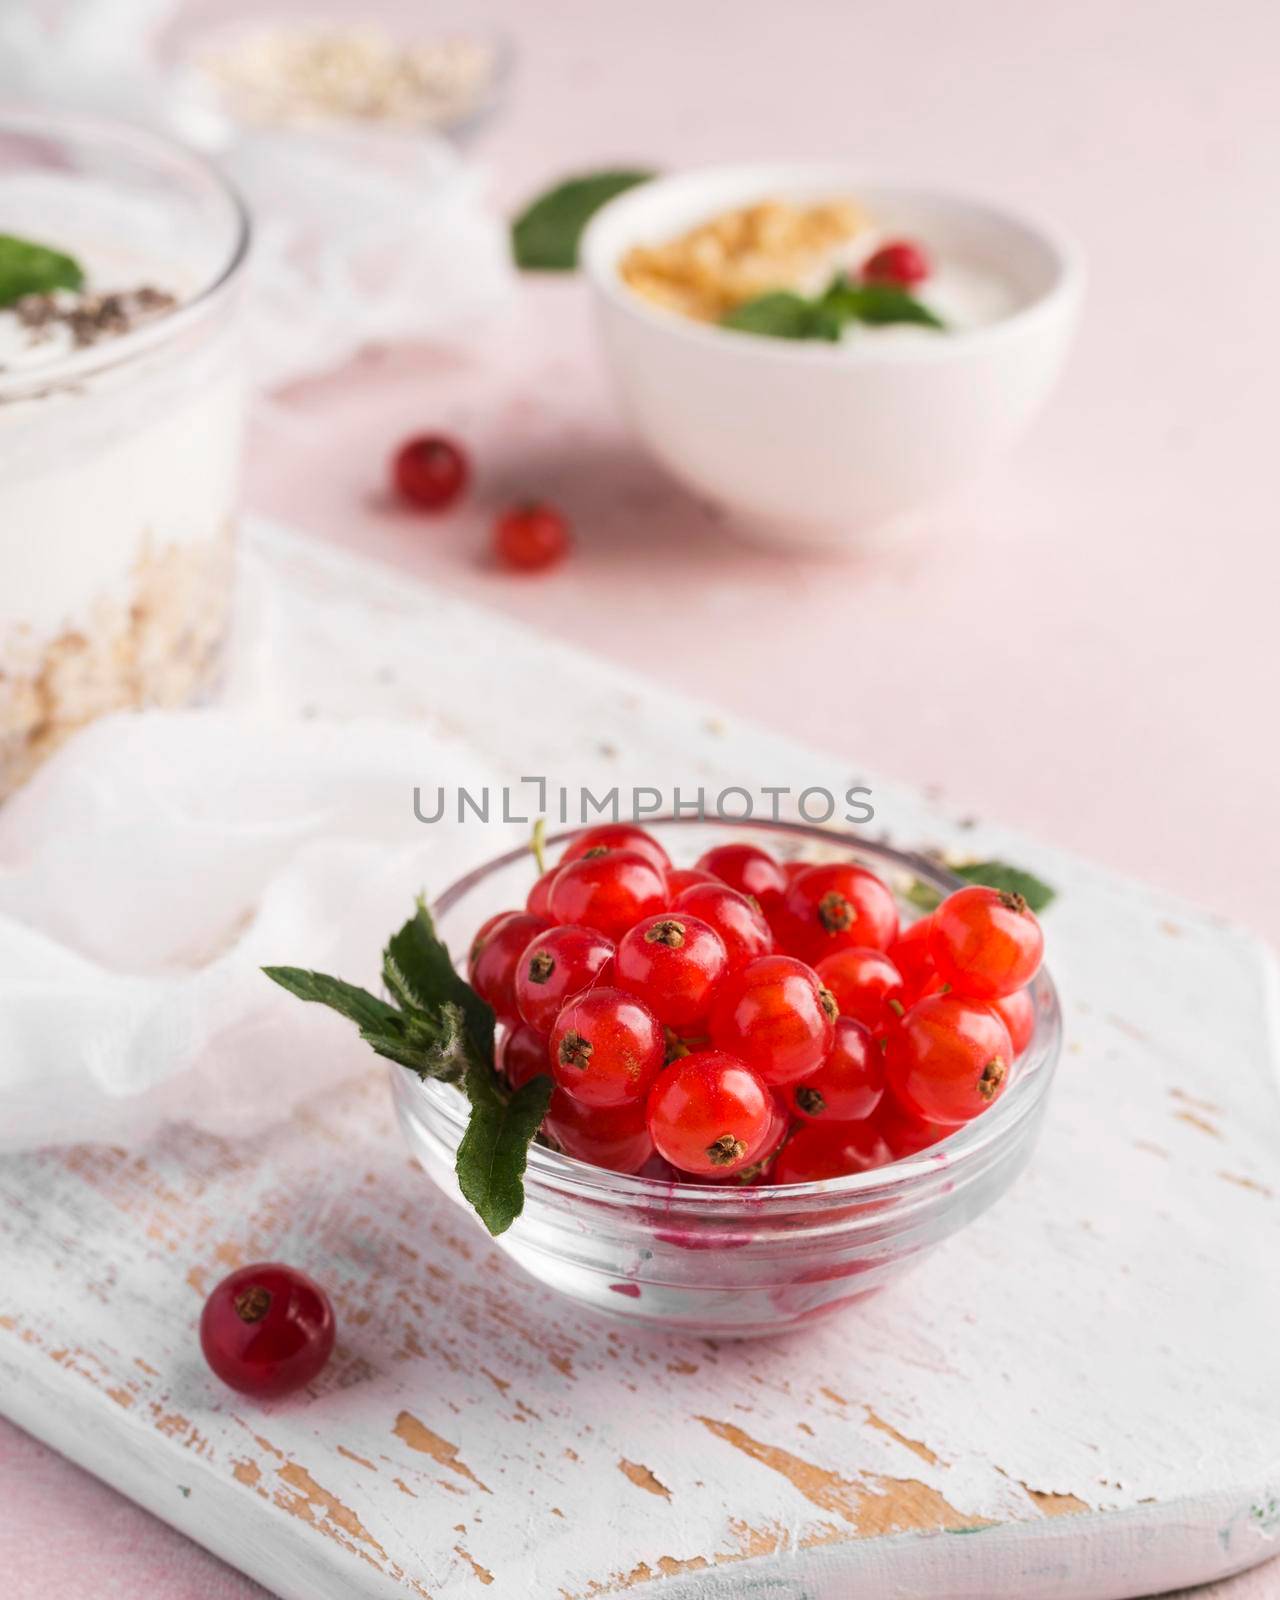 cranberries small bowl bio food lifestyle concept. High resolution photo